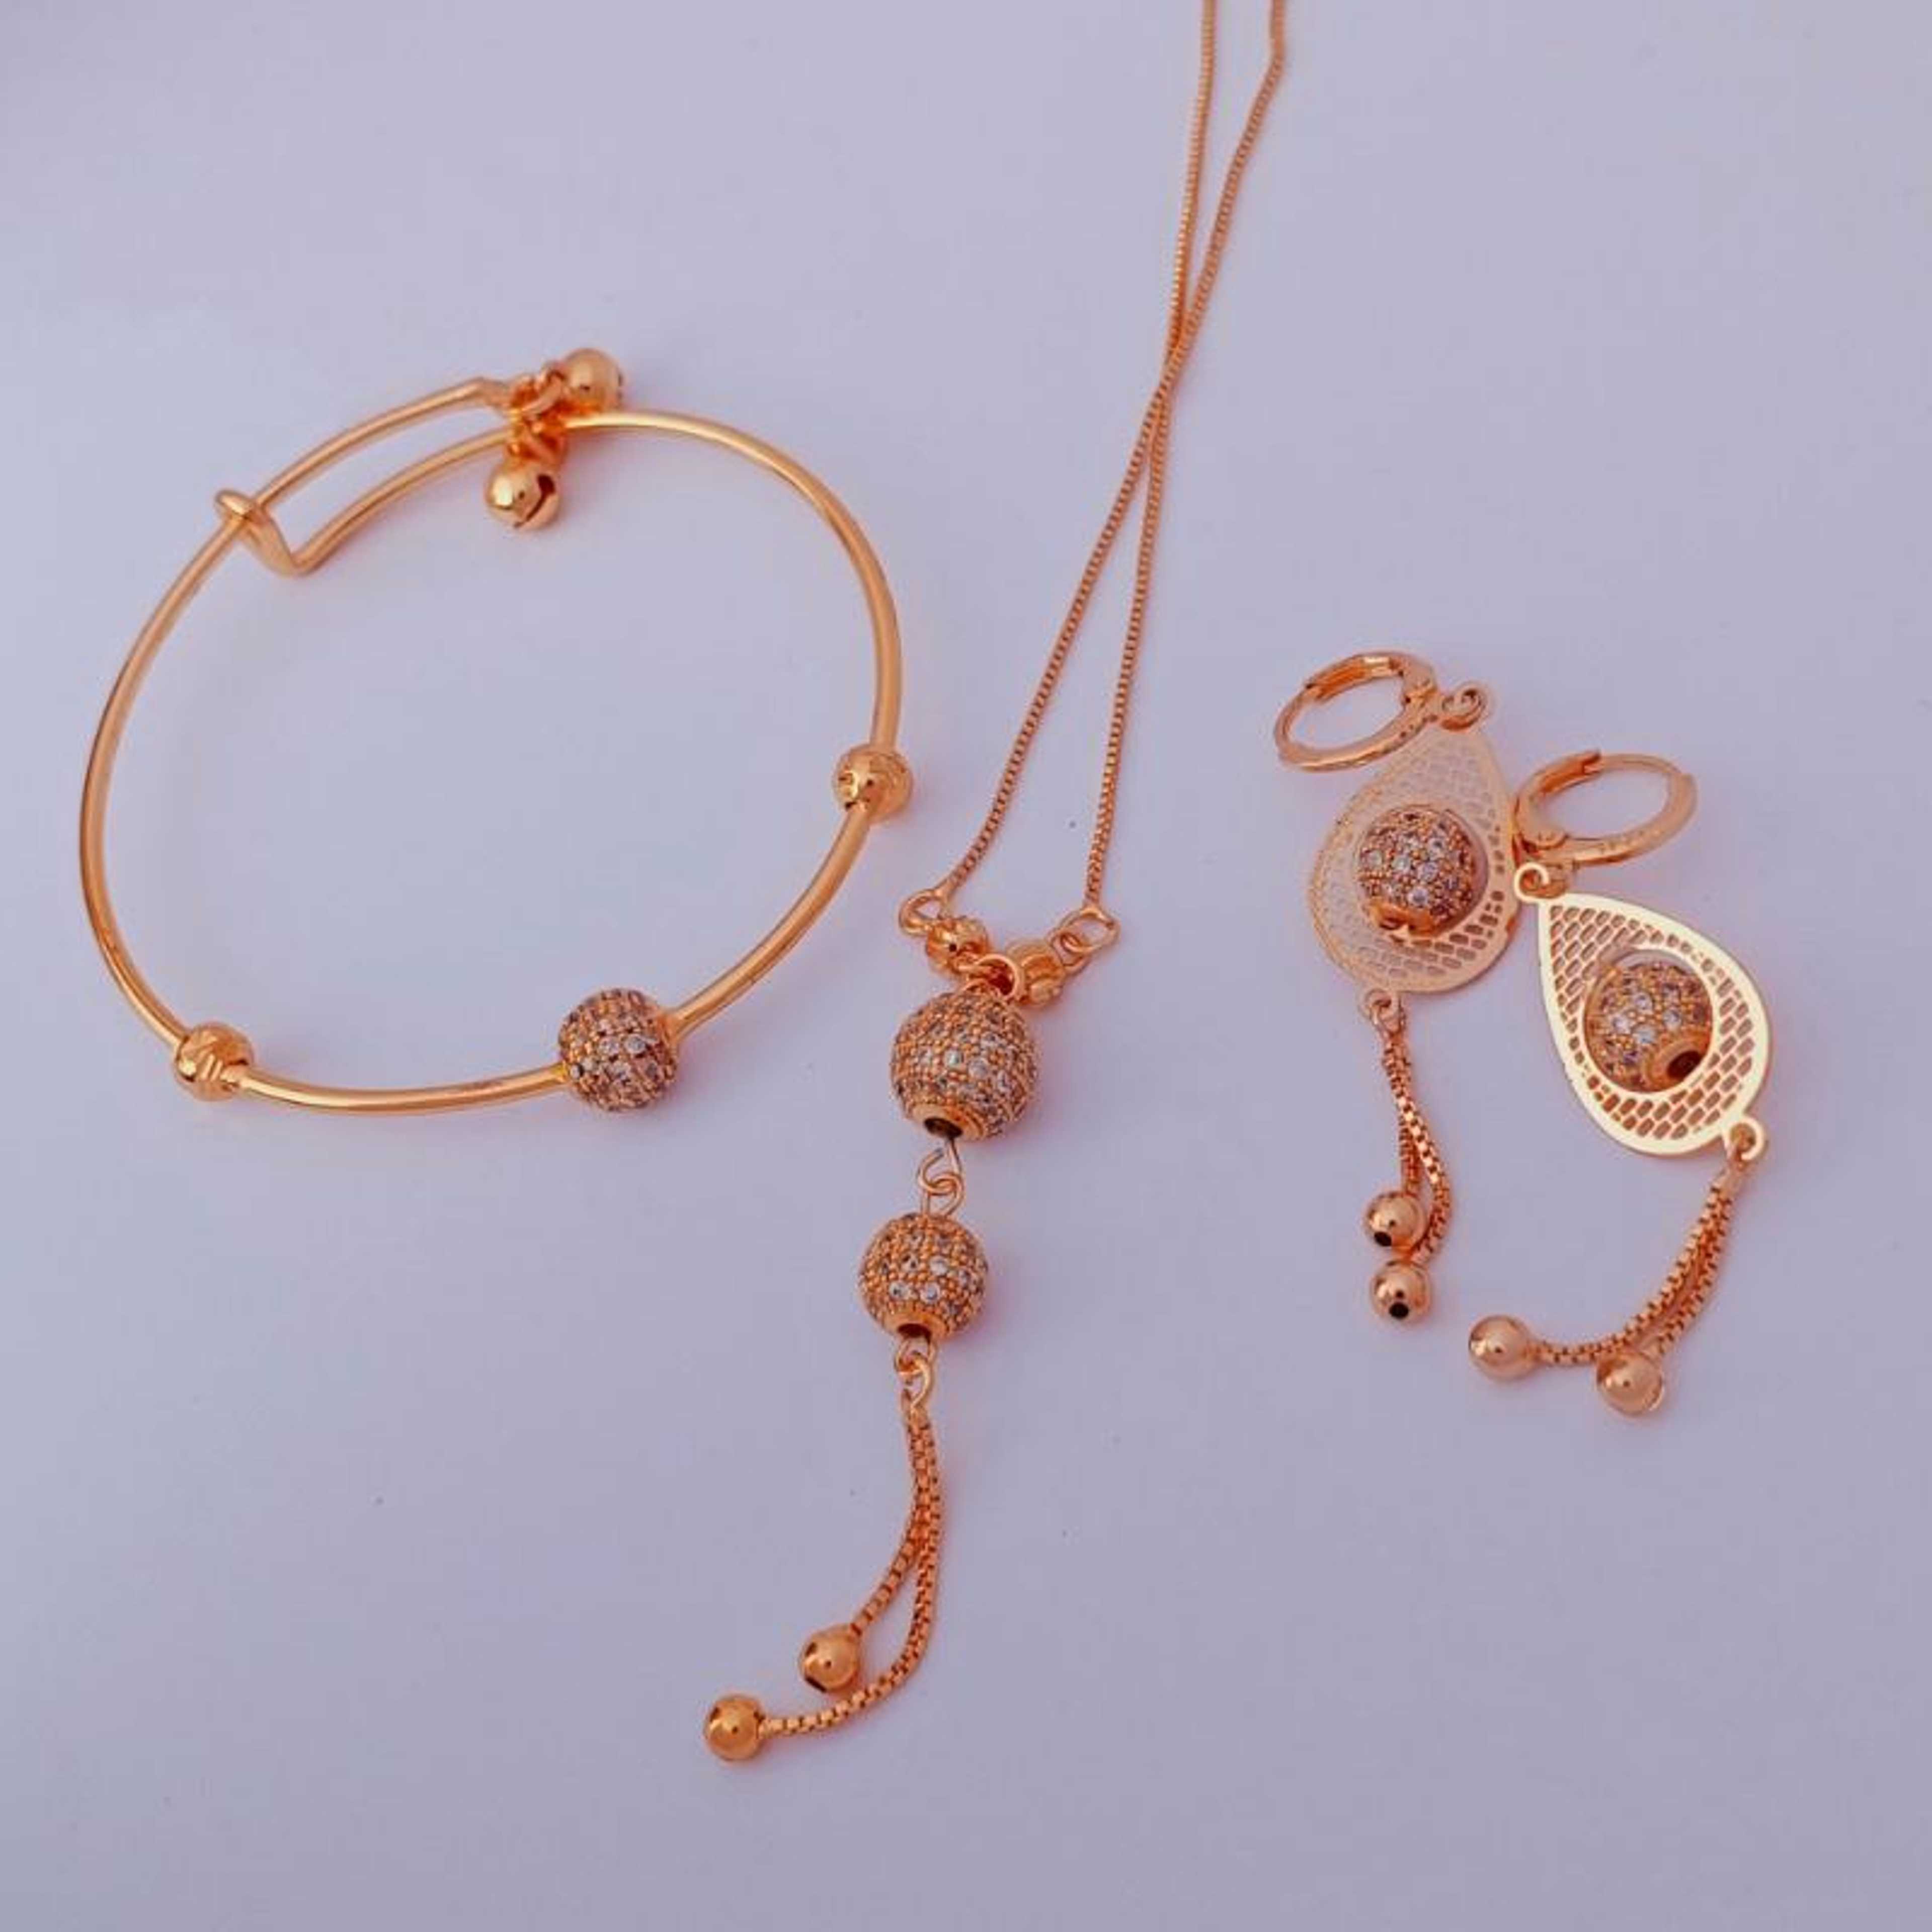 Zircon Ball Necklace for girls with Earring  Berslet Free Gift Box Jewellery set for girls By The Online World.